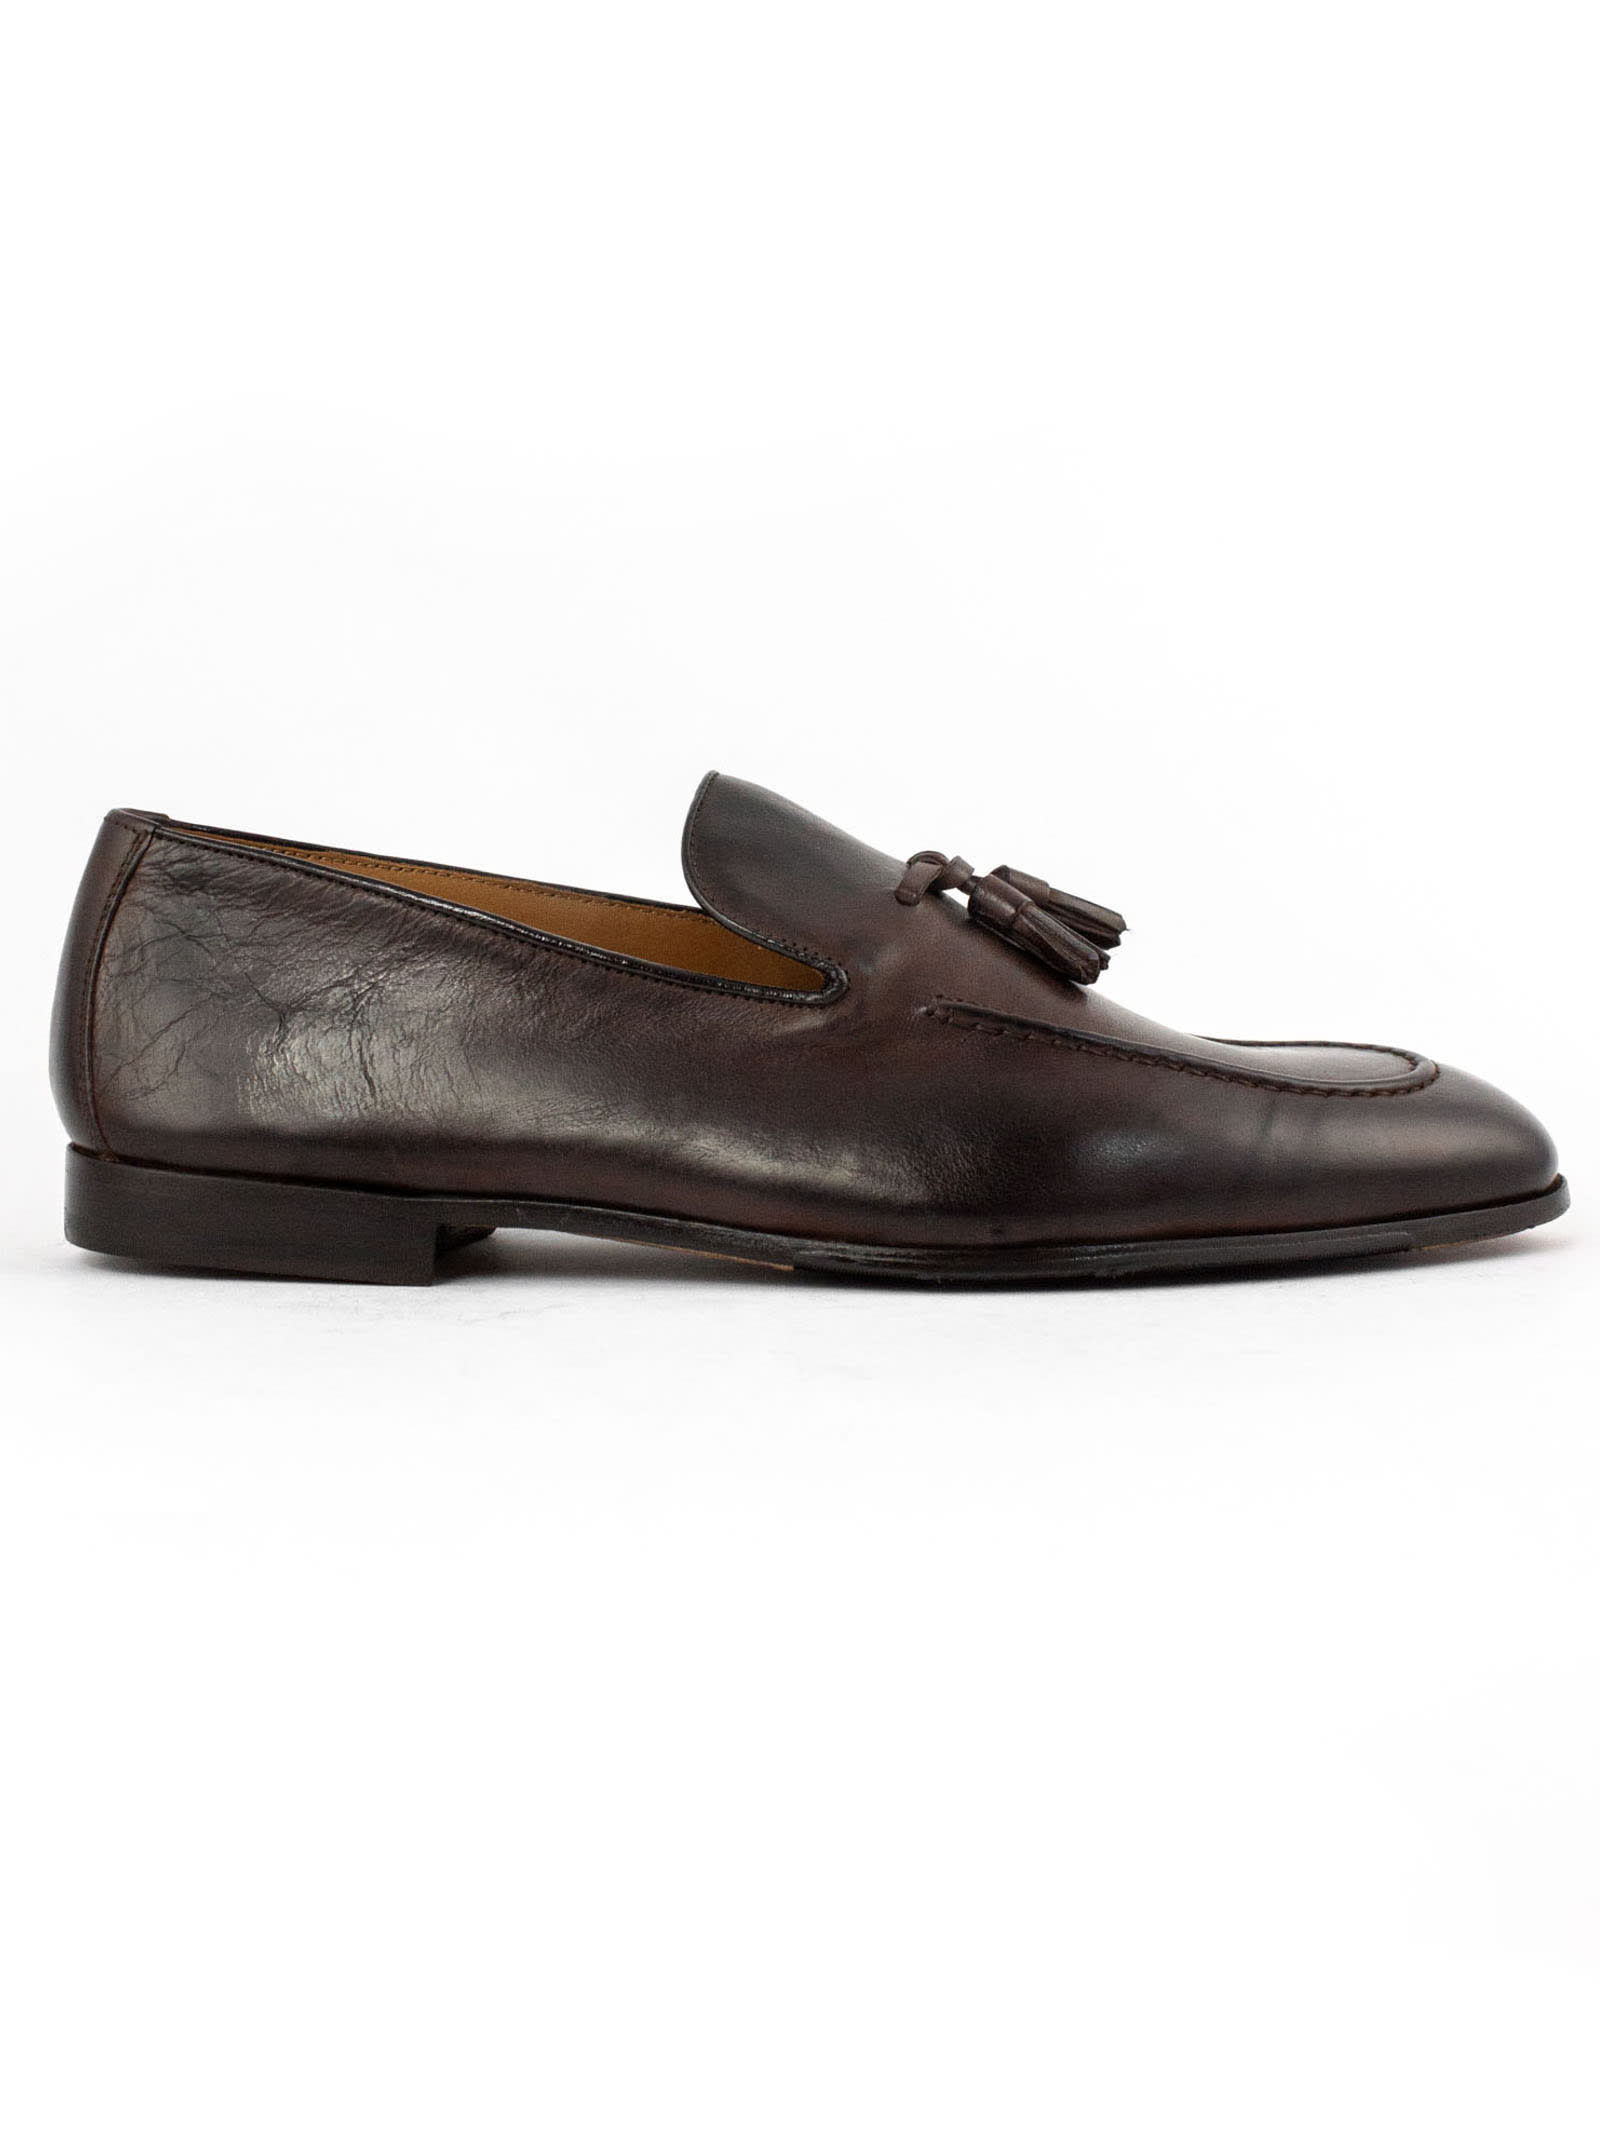 Doucals Brown Smooth Leather Loafer